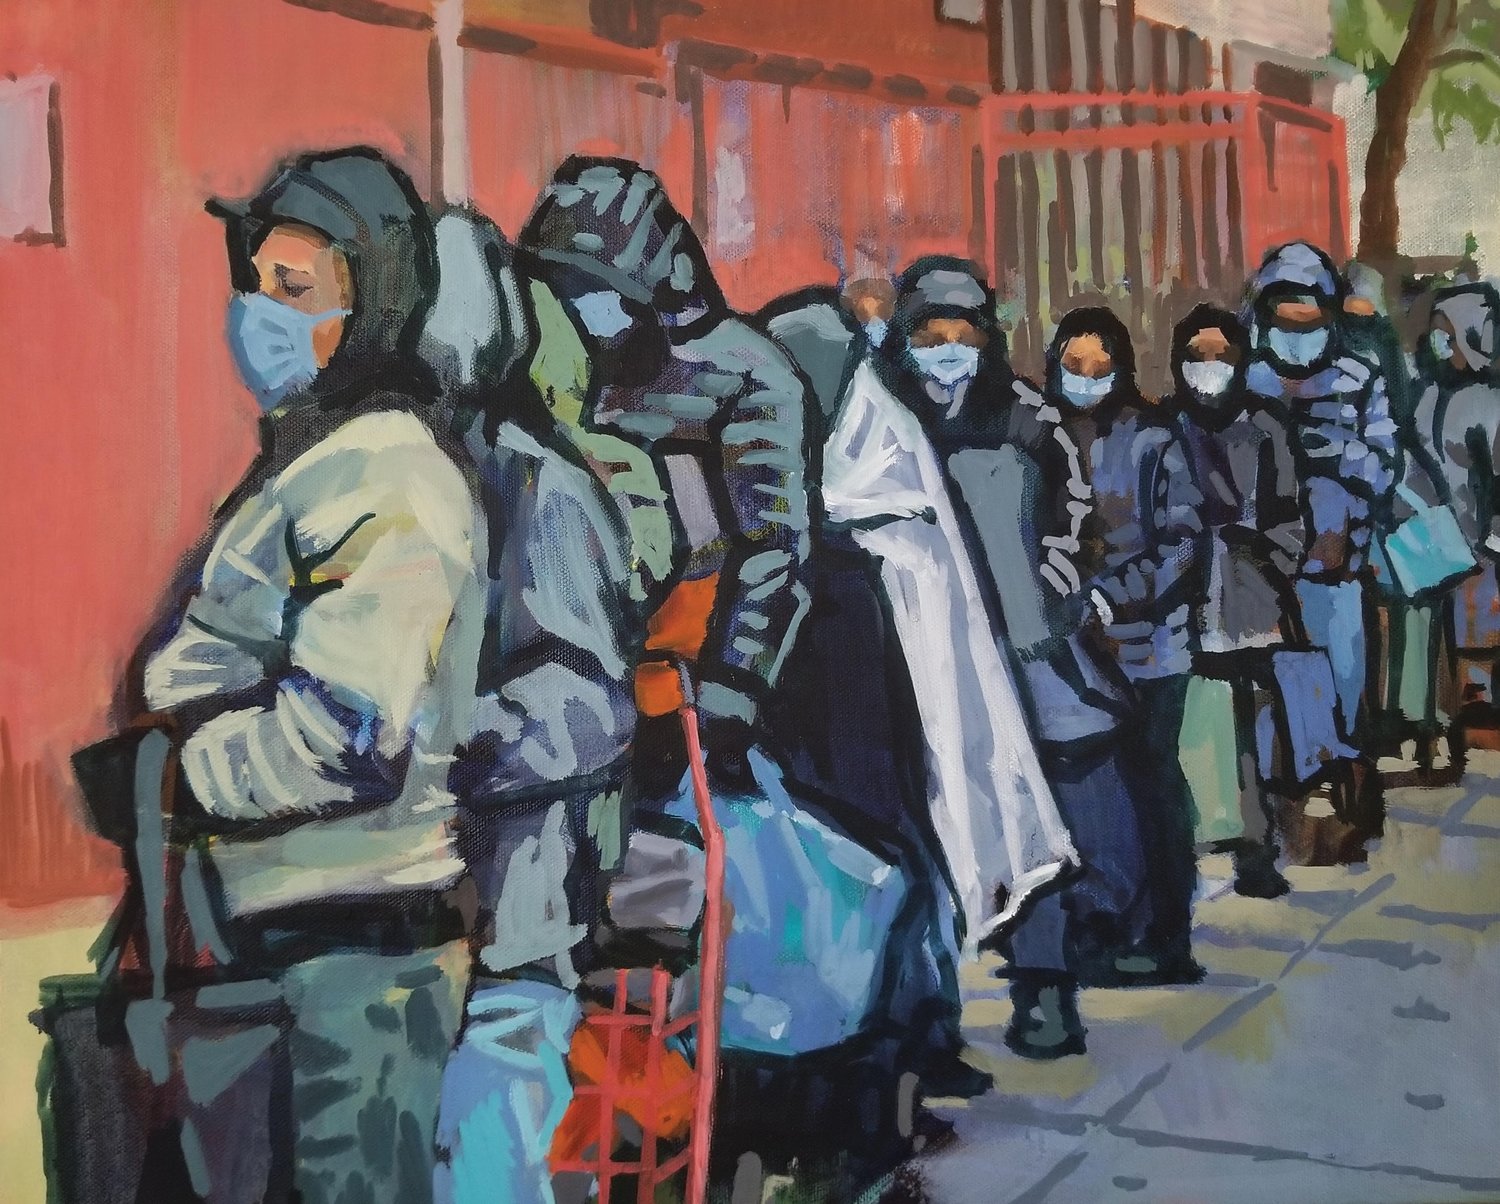 “Lack of Privilege (COVID Bread Line)” by Francisco Silva spotlights the harsh reality many faced during the pandemic, forced to apply for public assistance when employment vanished.